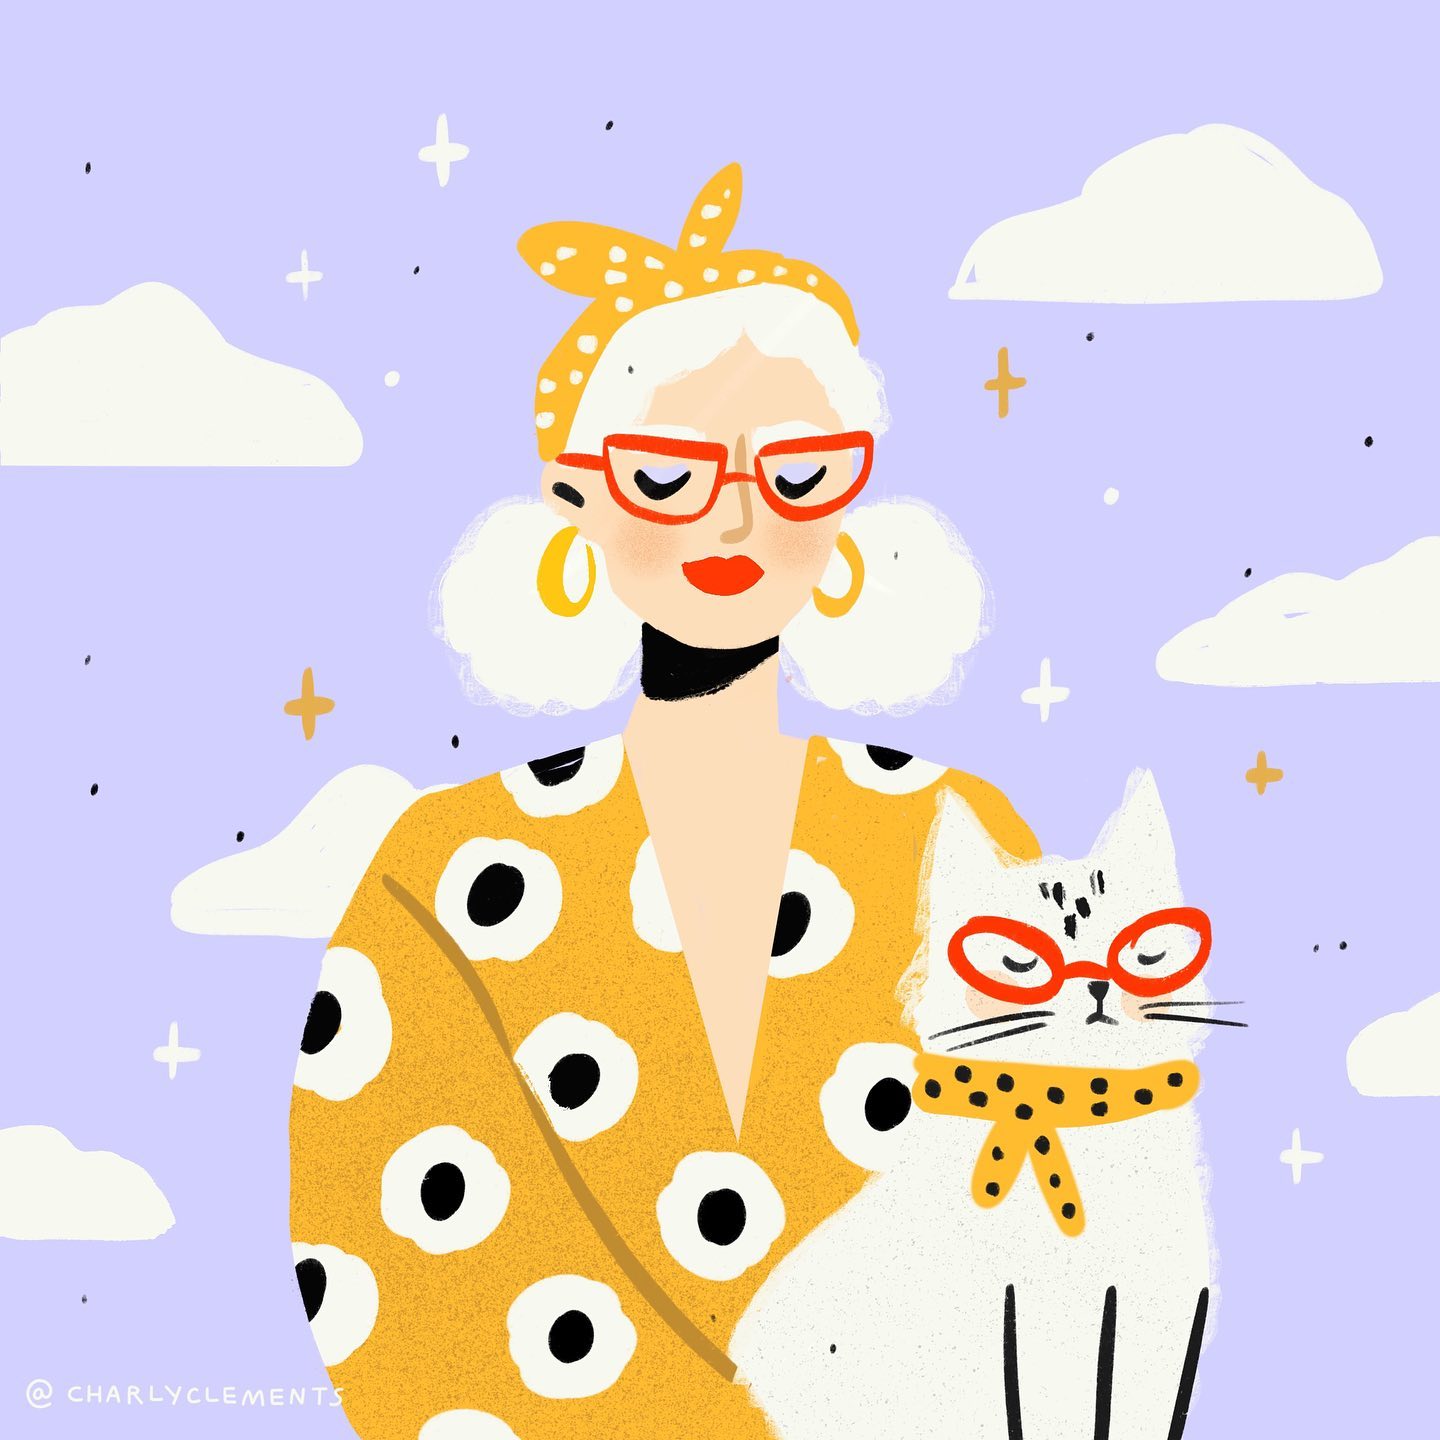 illustration of stylish girl and her cat illustration by Charly Clements